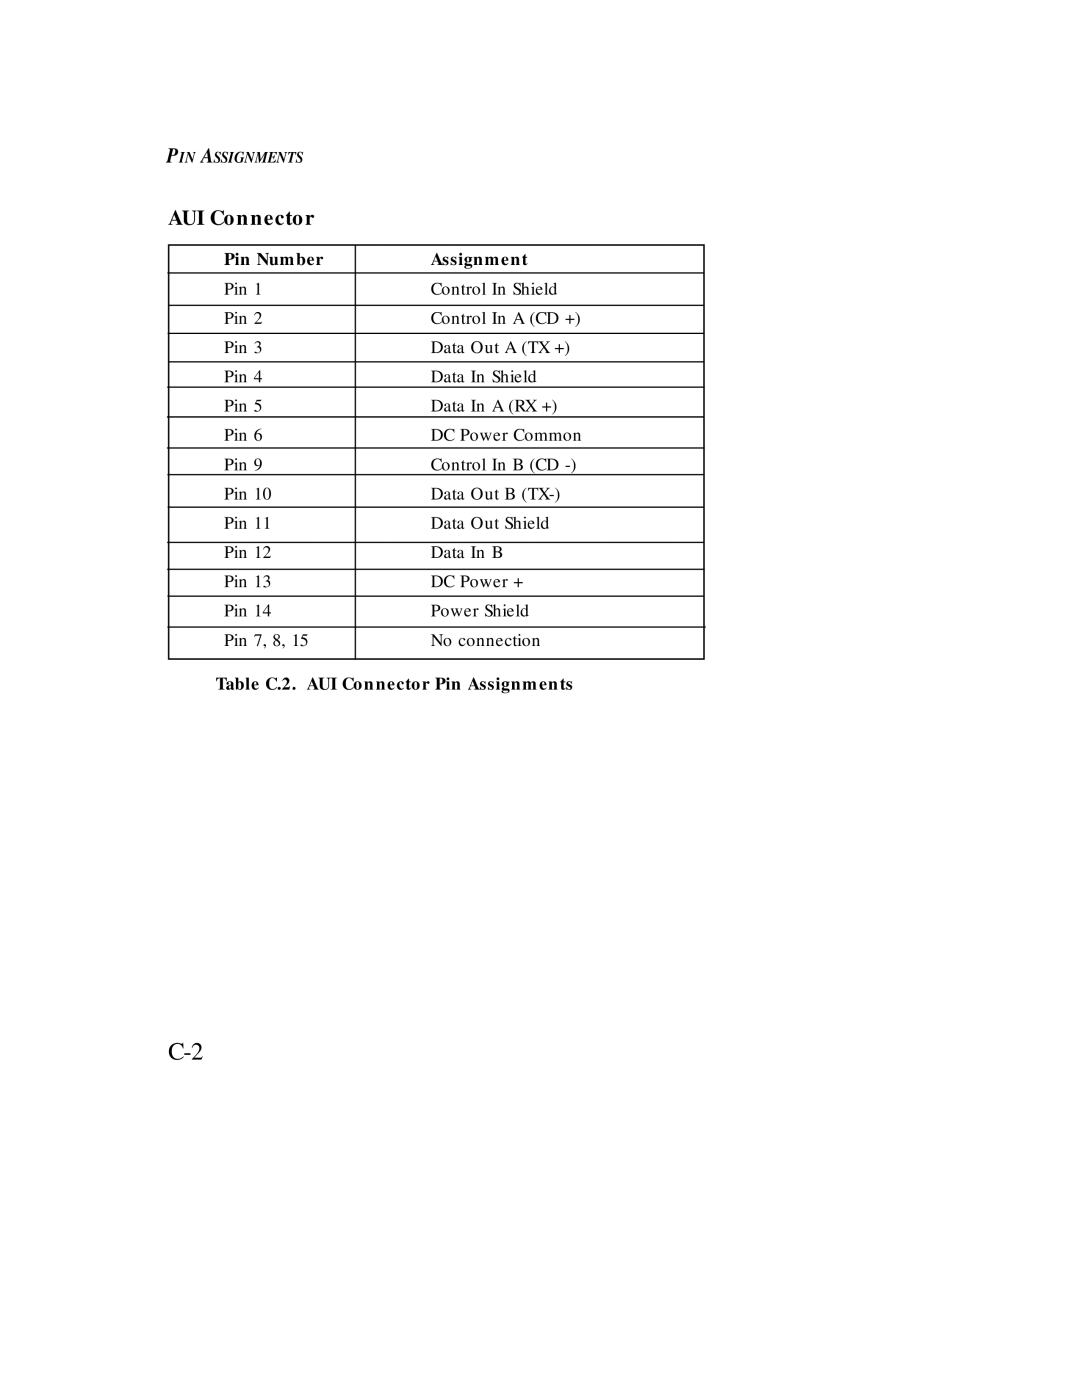 SMC Networks Ethernet ISA Network Cards manual Table C.2. AUI Connector Pin Assignments 